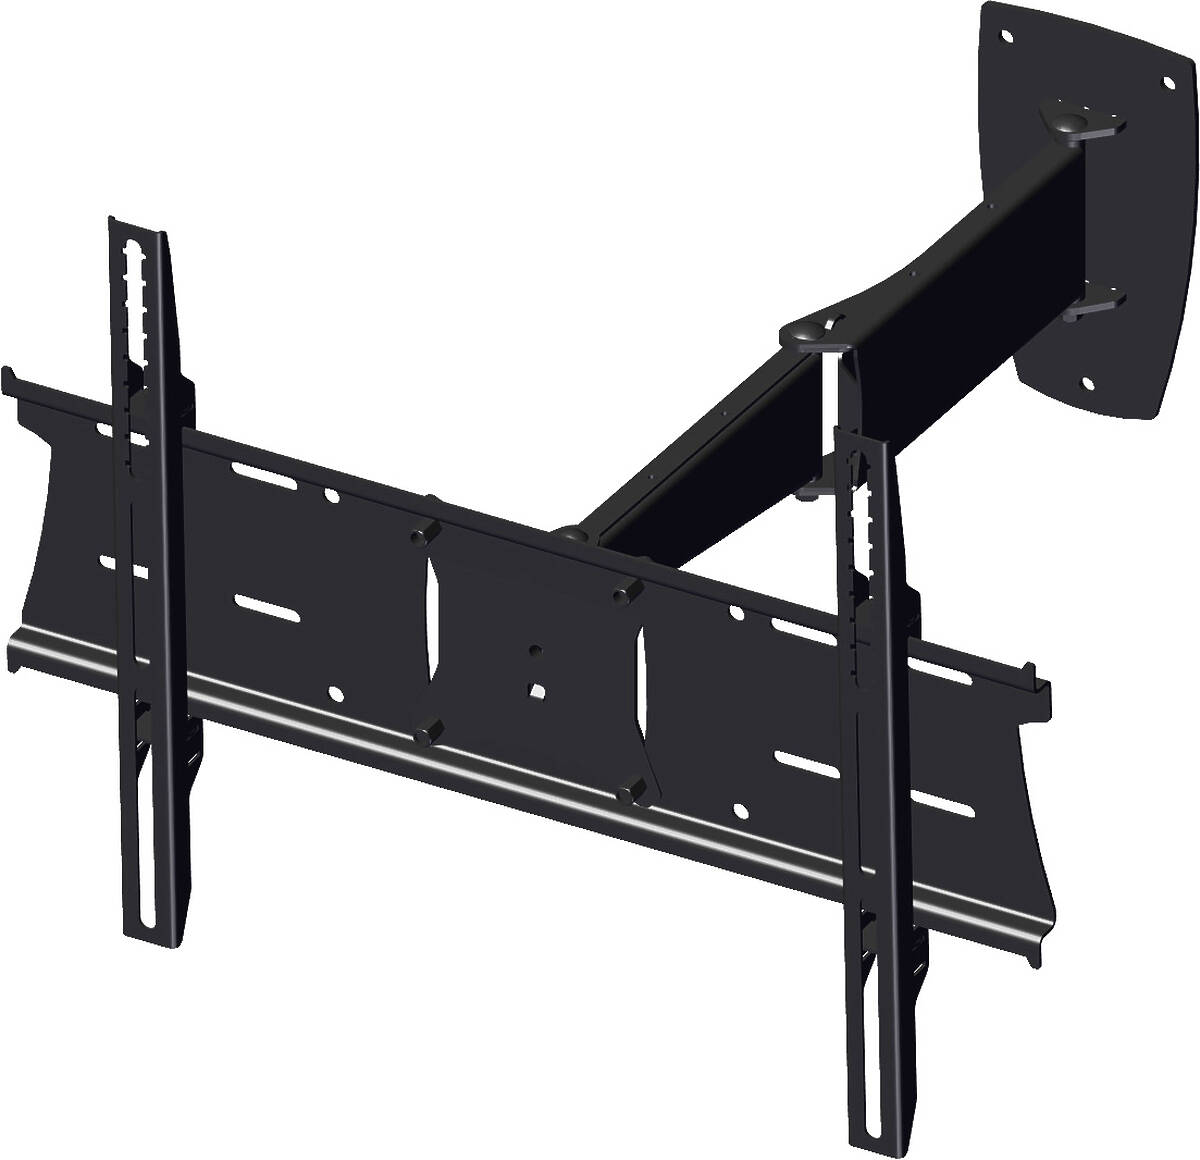 Unicol PLA1X1 Panarm Heavy Duty Dual Arm Swing-out Wall Mount for screens 33-57" product image. Click to enlarge.